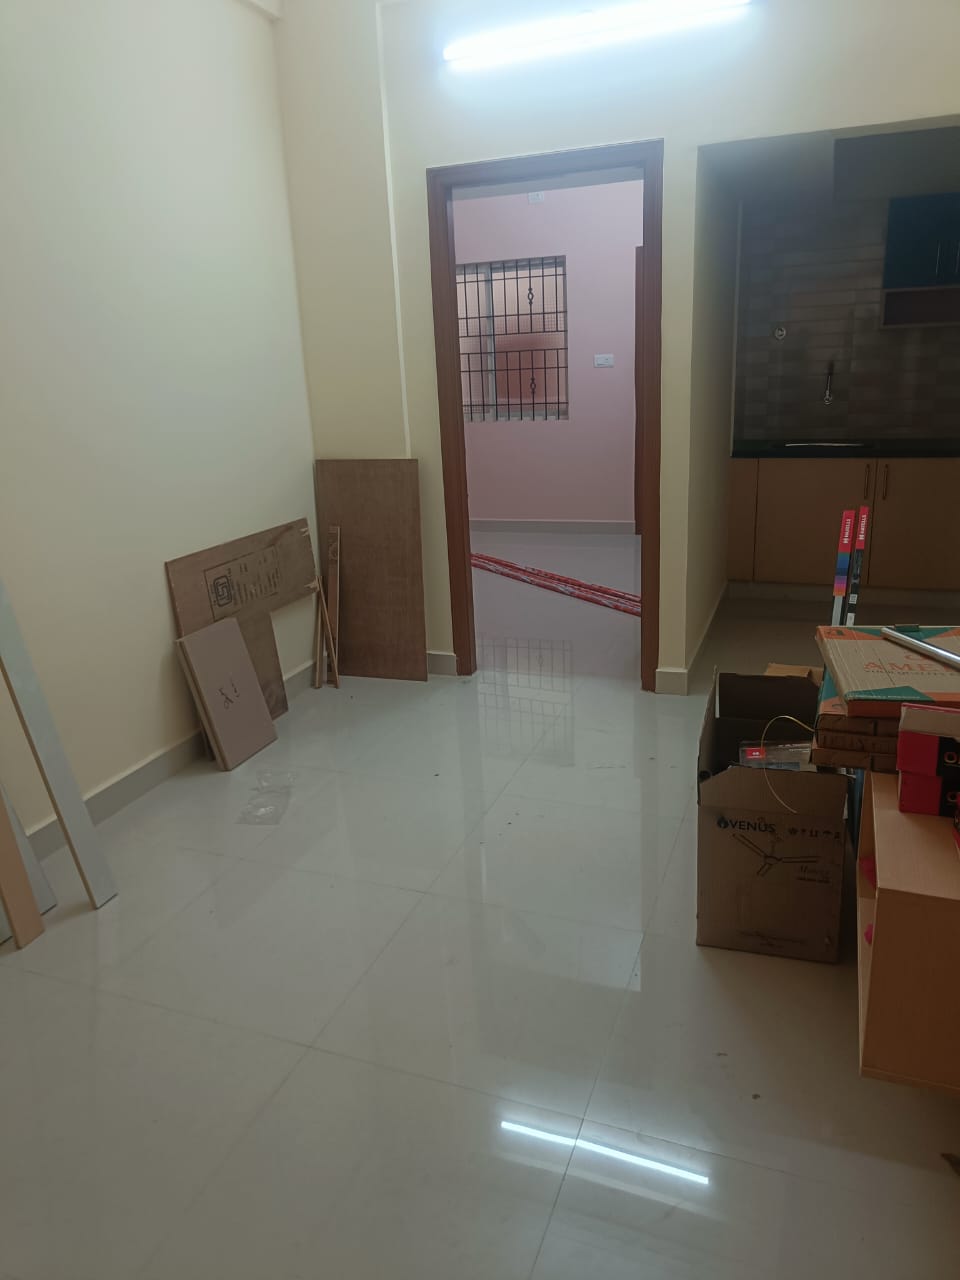 1 BHK Independent House for Lease Only at JAML2 - 3326 in BEML Layout